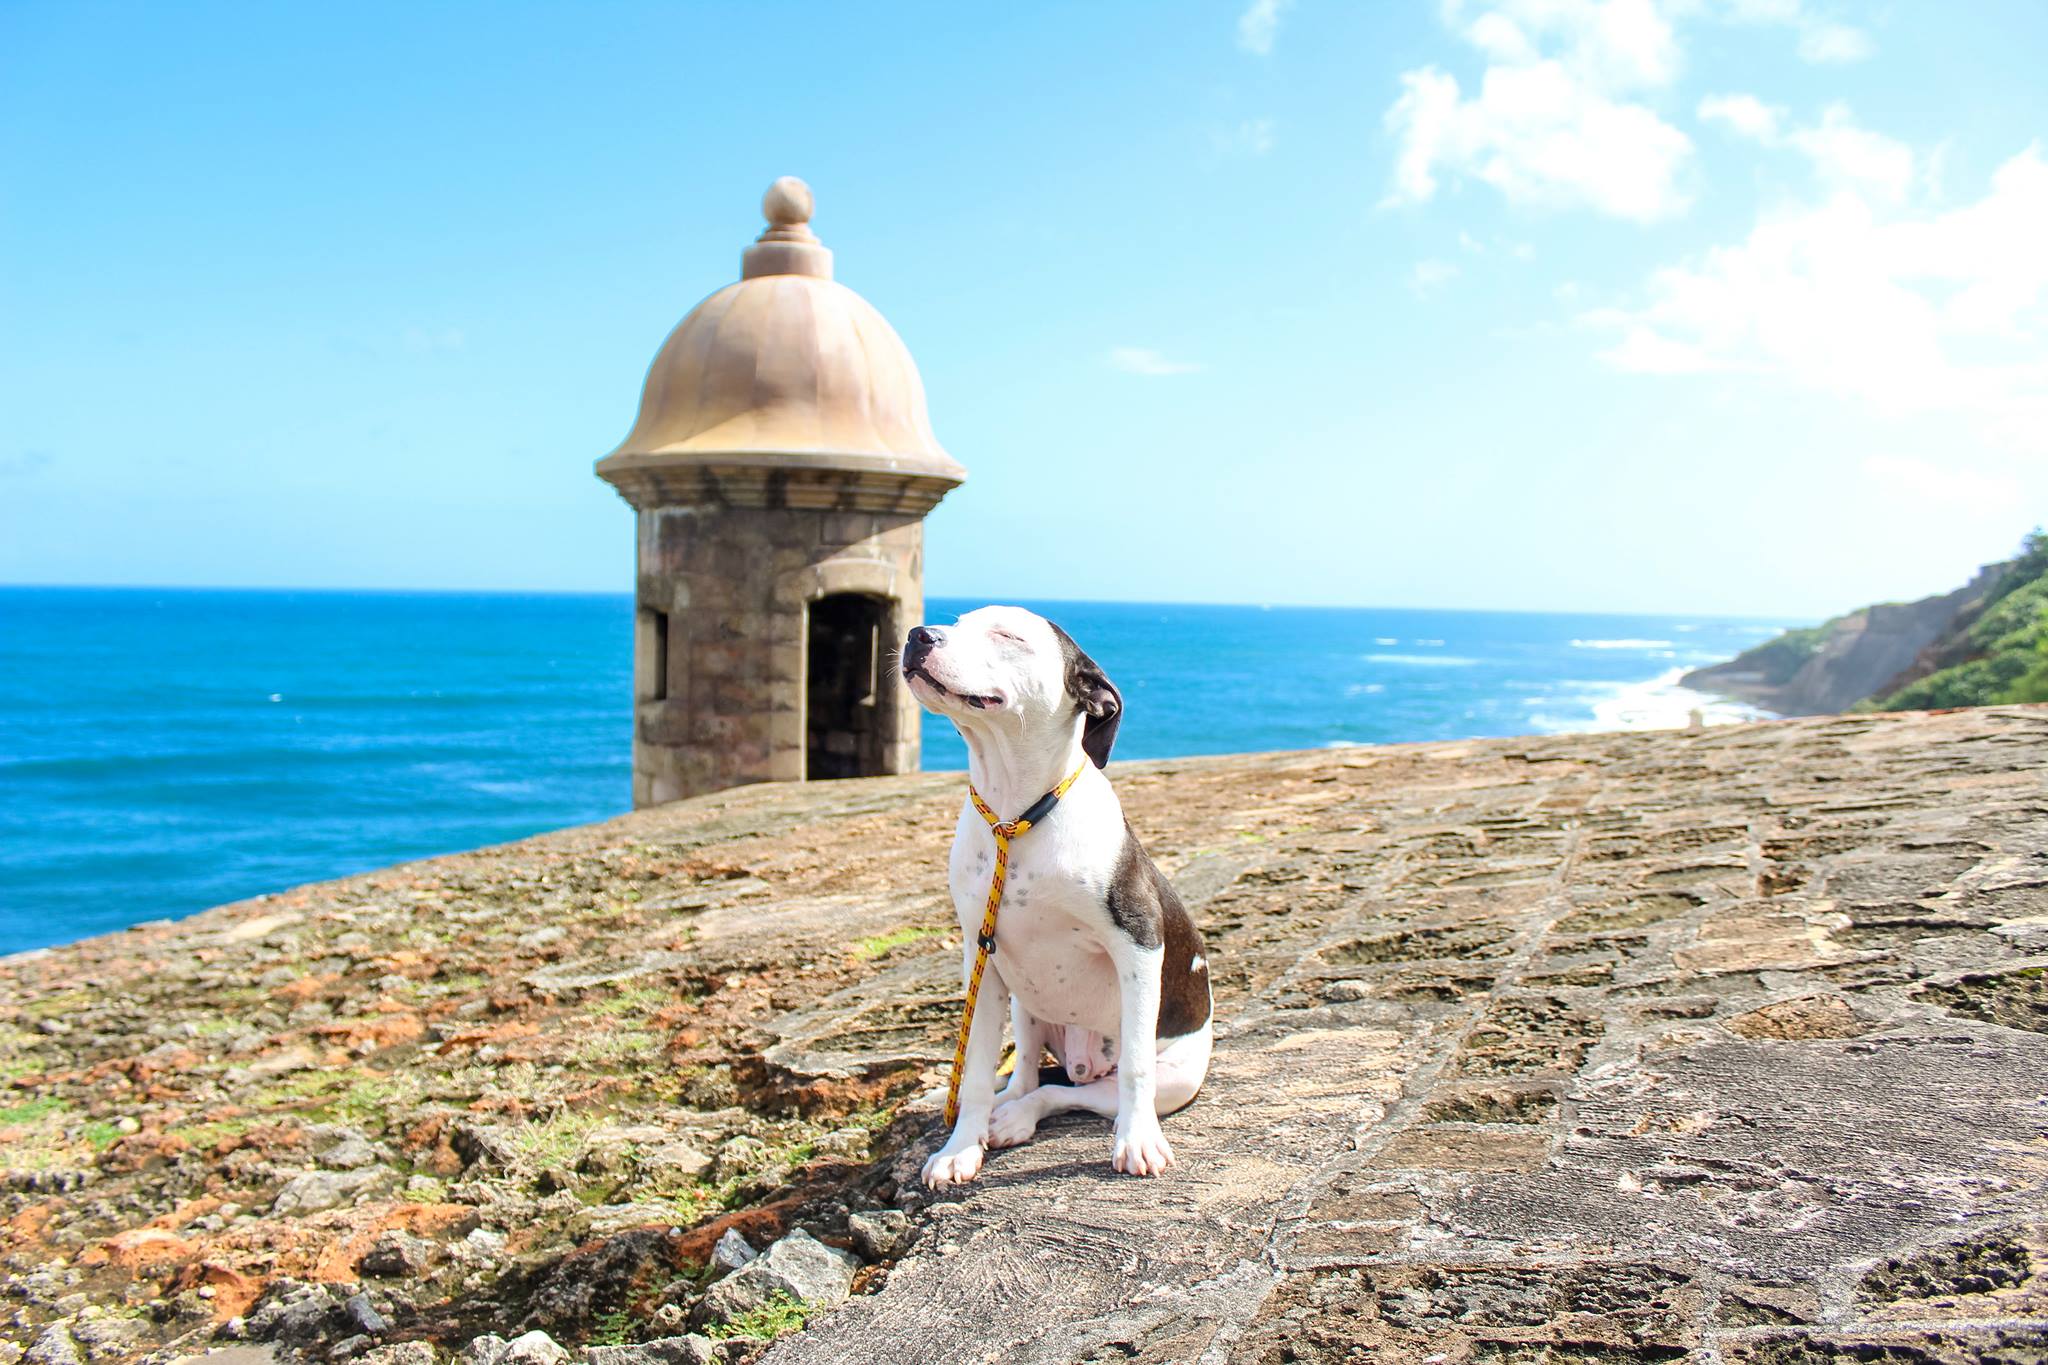 Satos are Puerto Rican Street Dogs, and You Can Adopt One - LIFE WITH DOGS